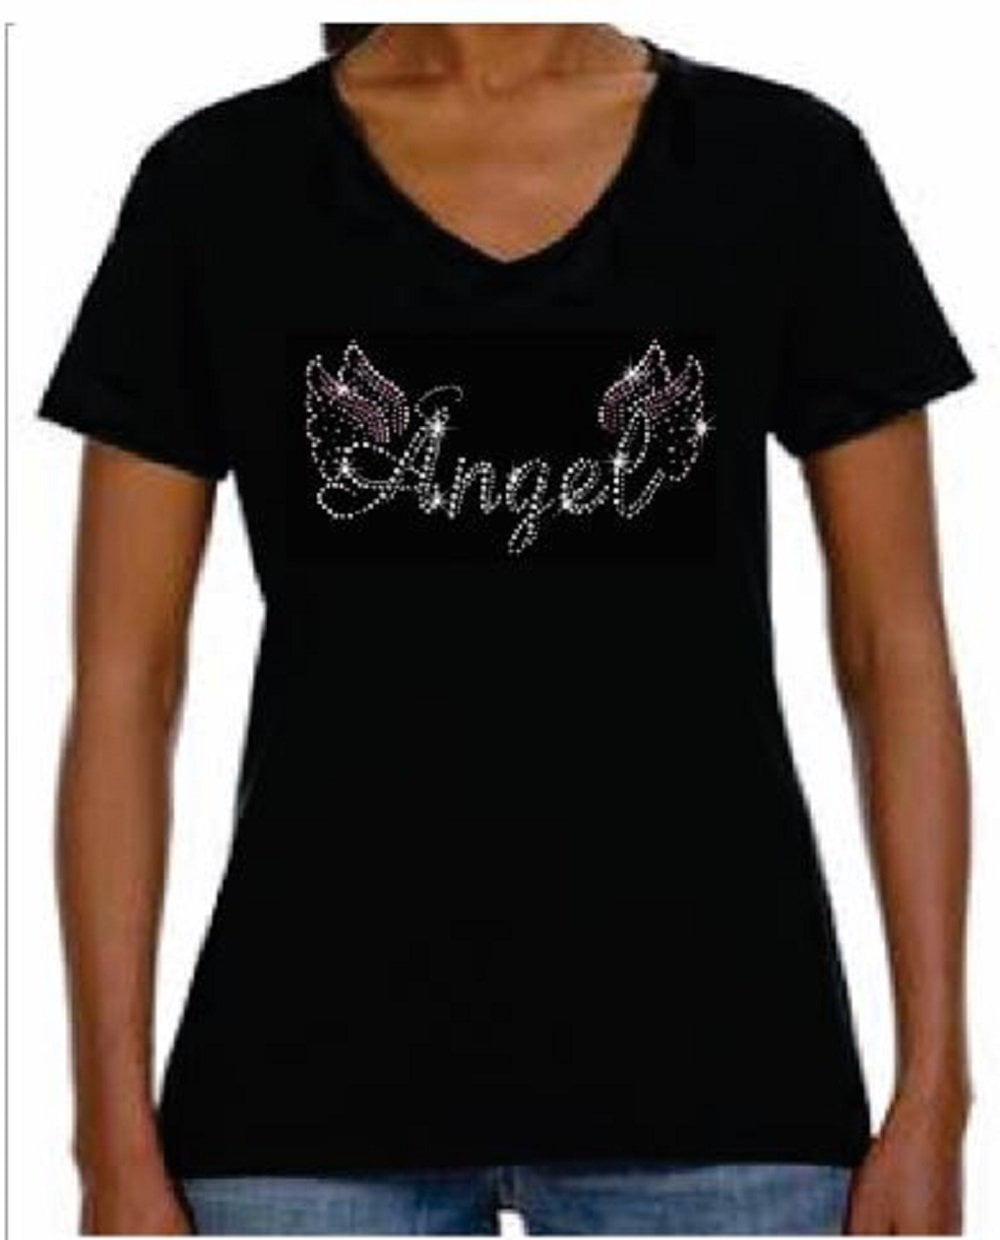 Ladies Womens Short Sleeve Halo Angel Wings Back Oversize Causal T Shirt Top 